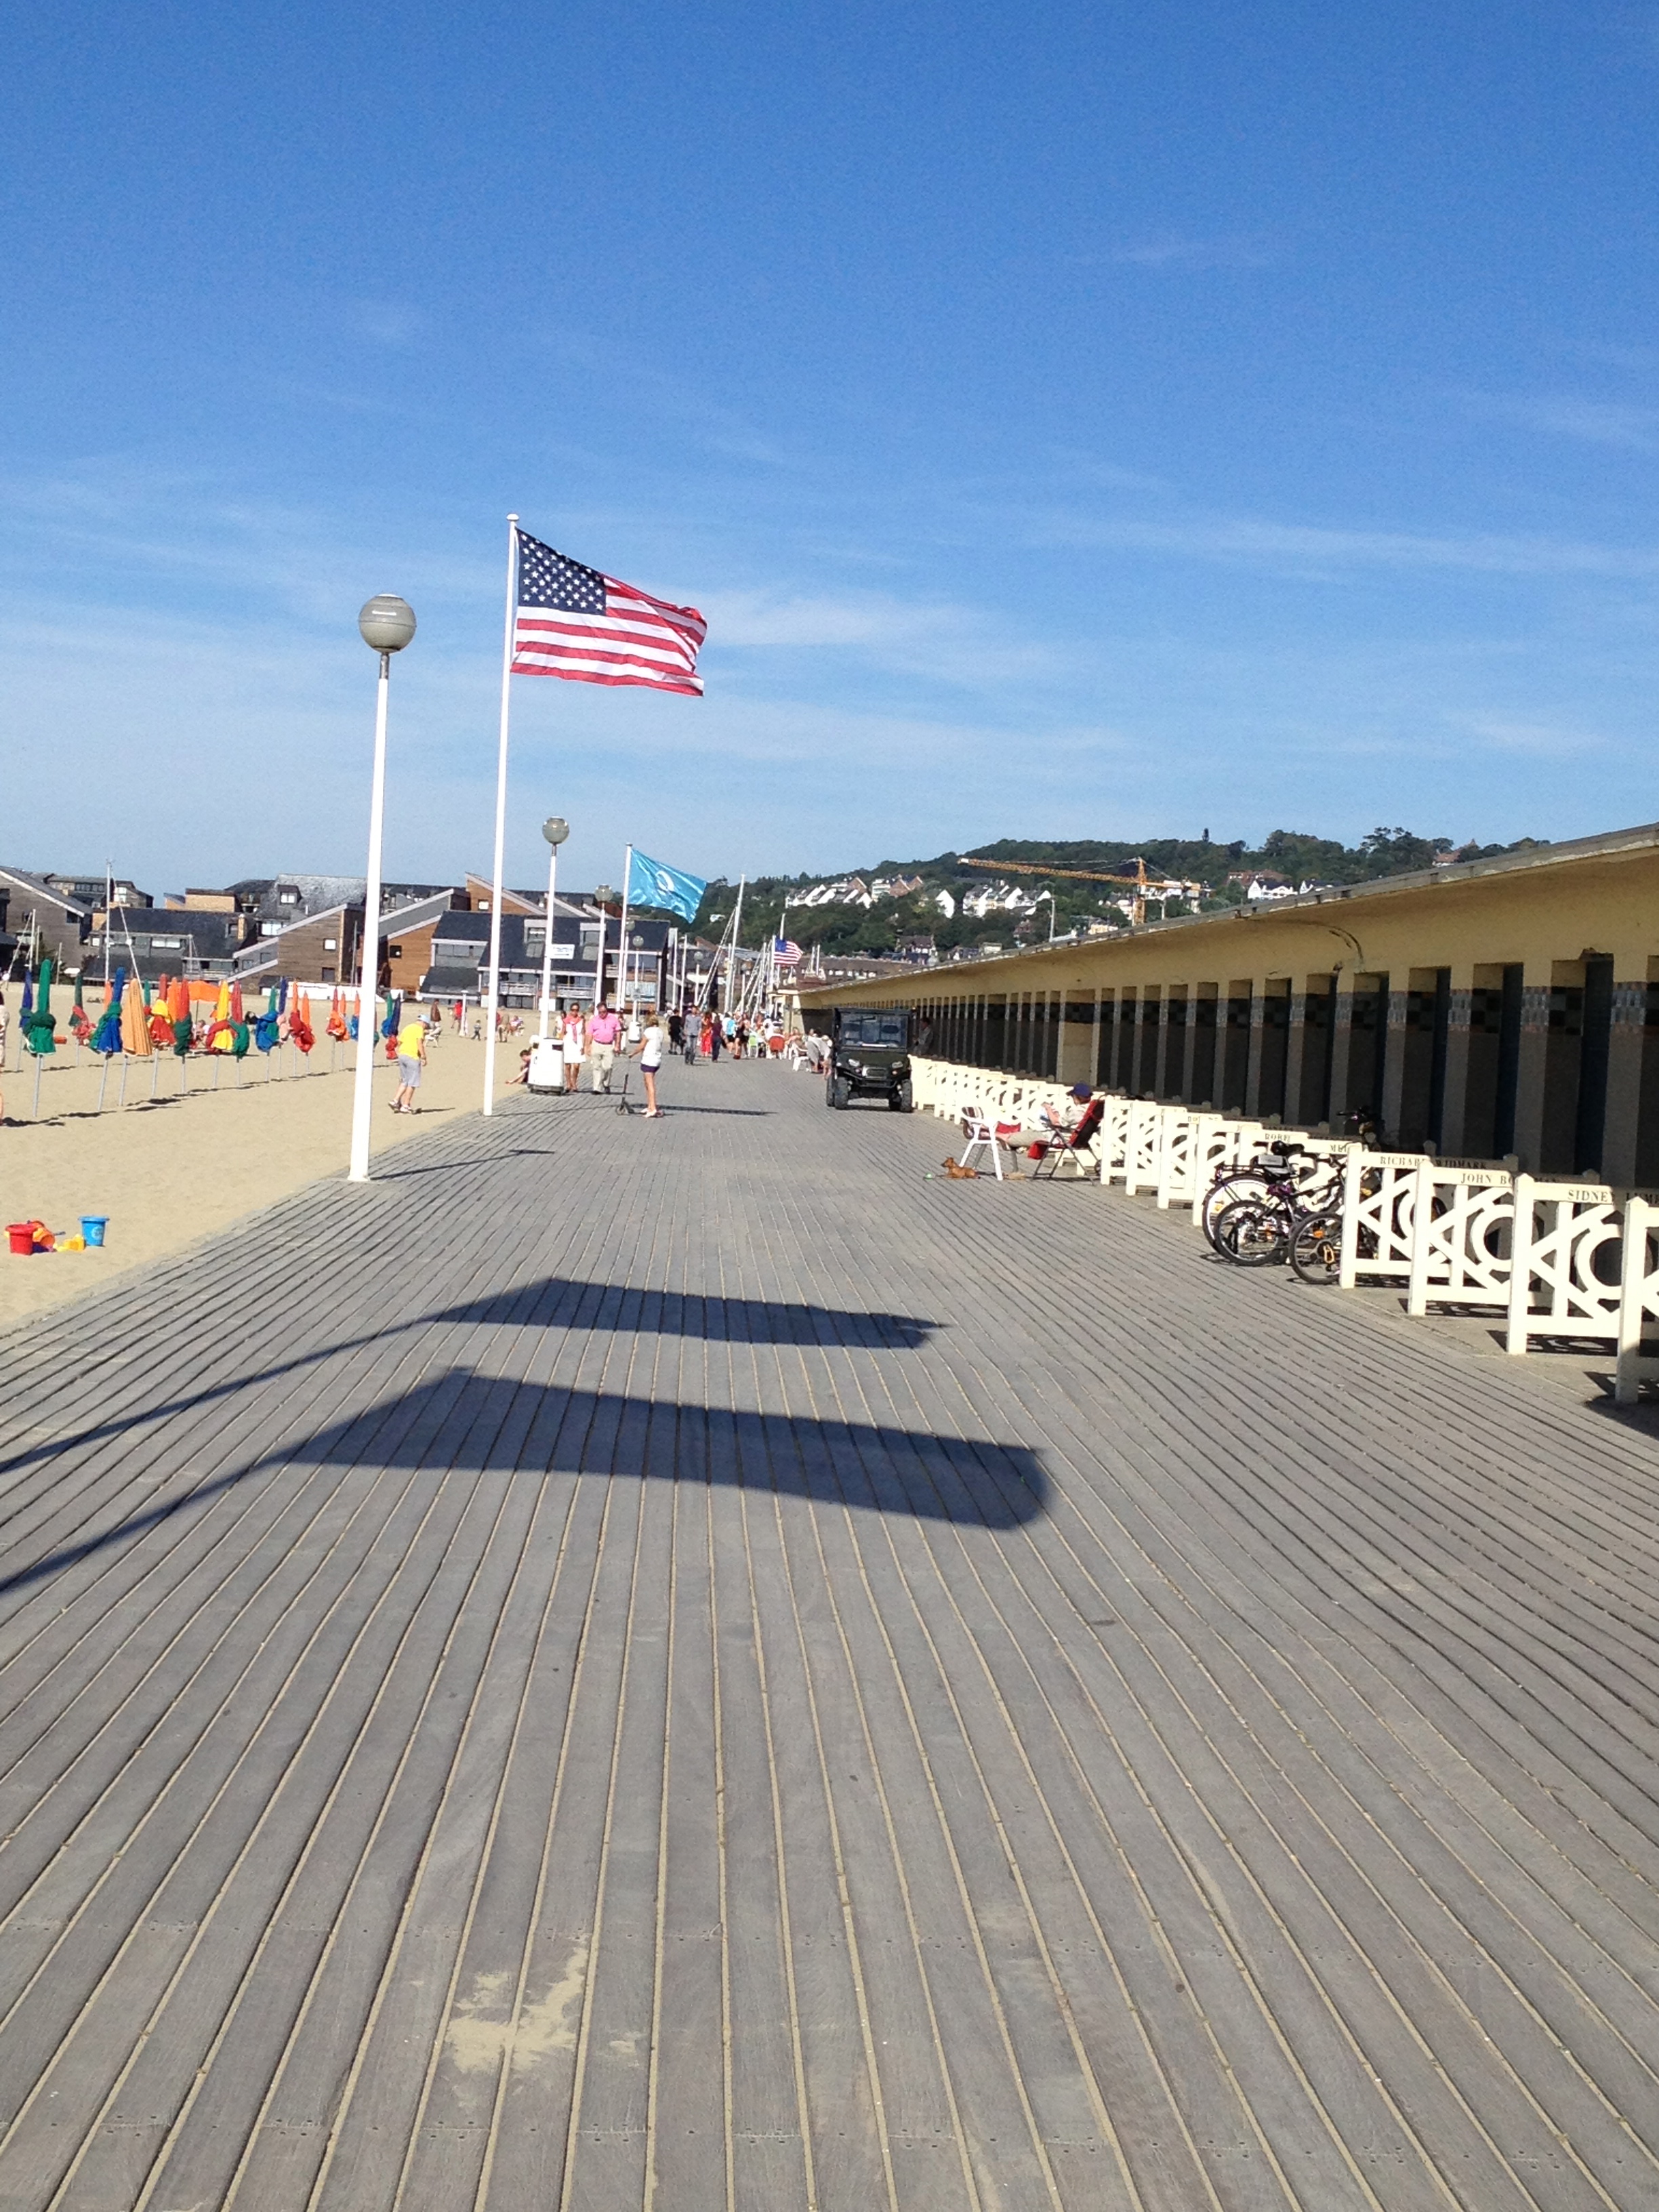 39th American Film Festival - Deauville, Normandy, France